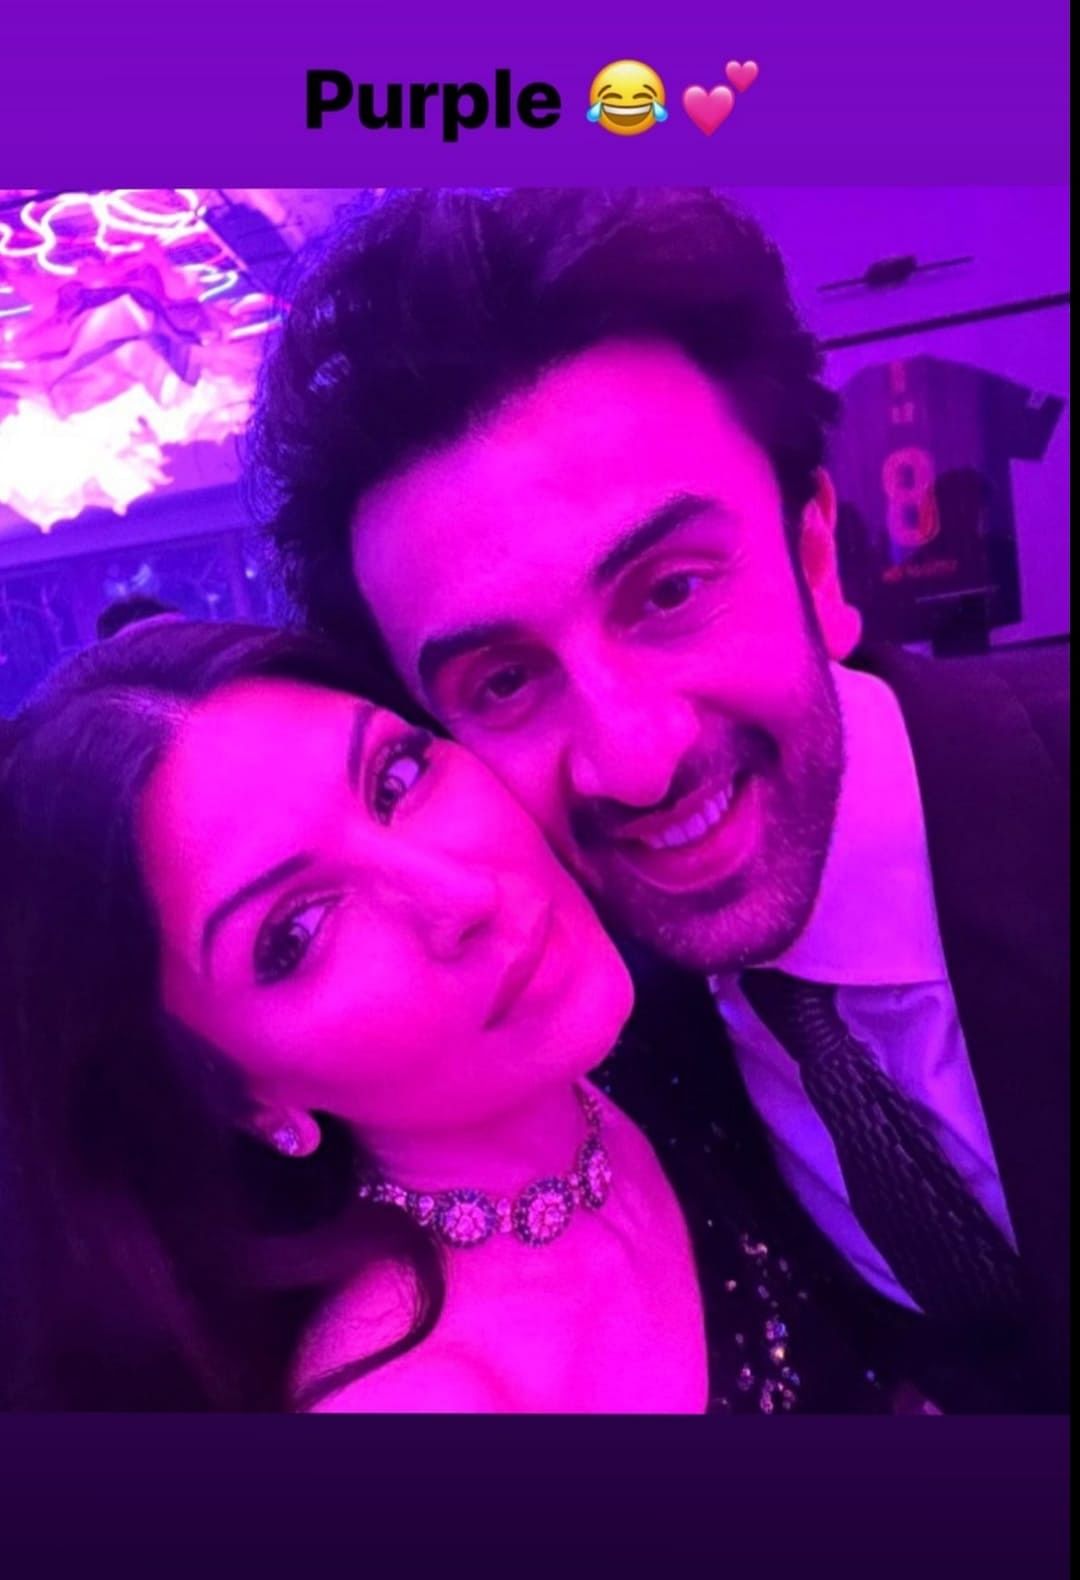 Alia and Ranbir host an intimate post-wedding reception. Check out the pictures!